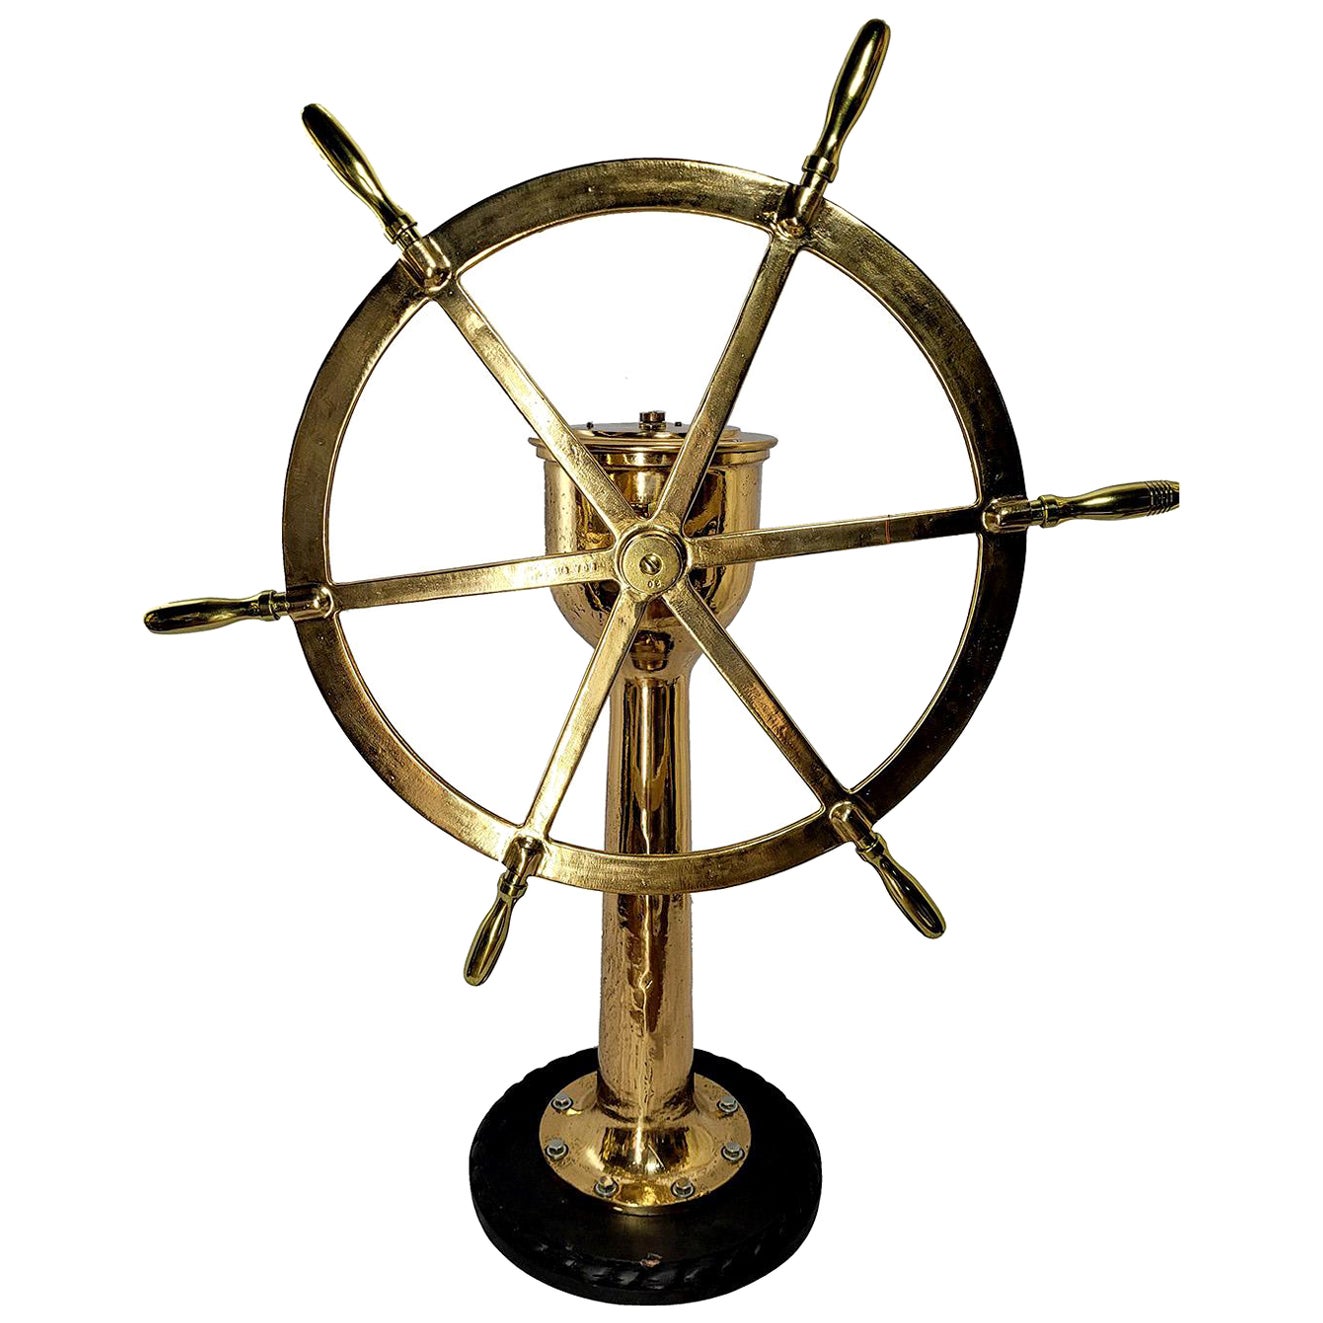 Ships Wheel on Pedestal by American Engineering Company